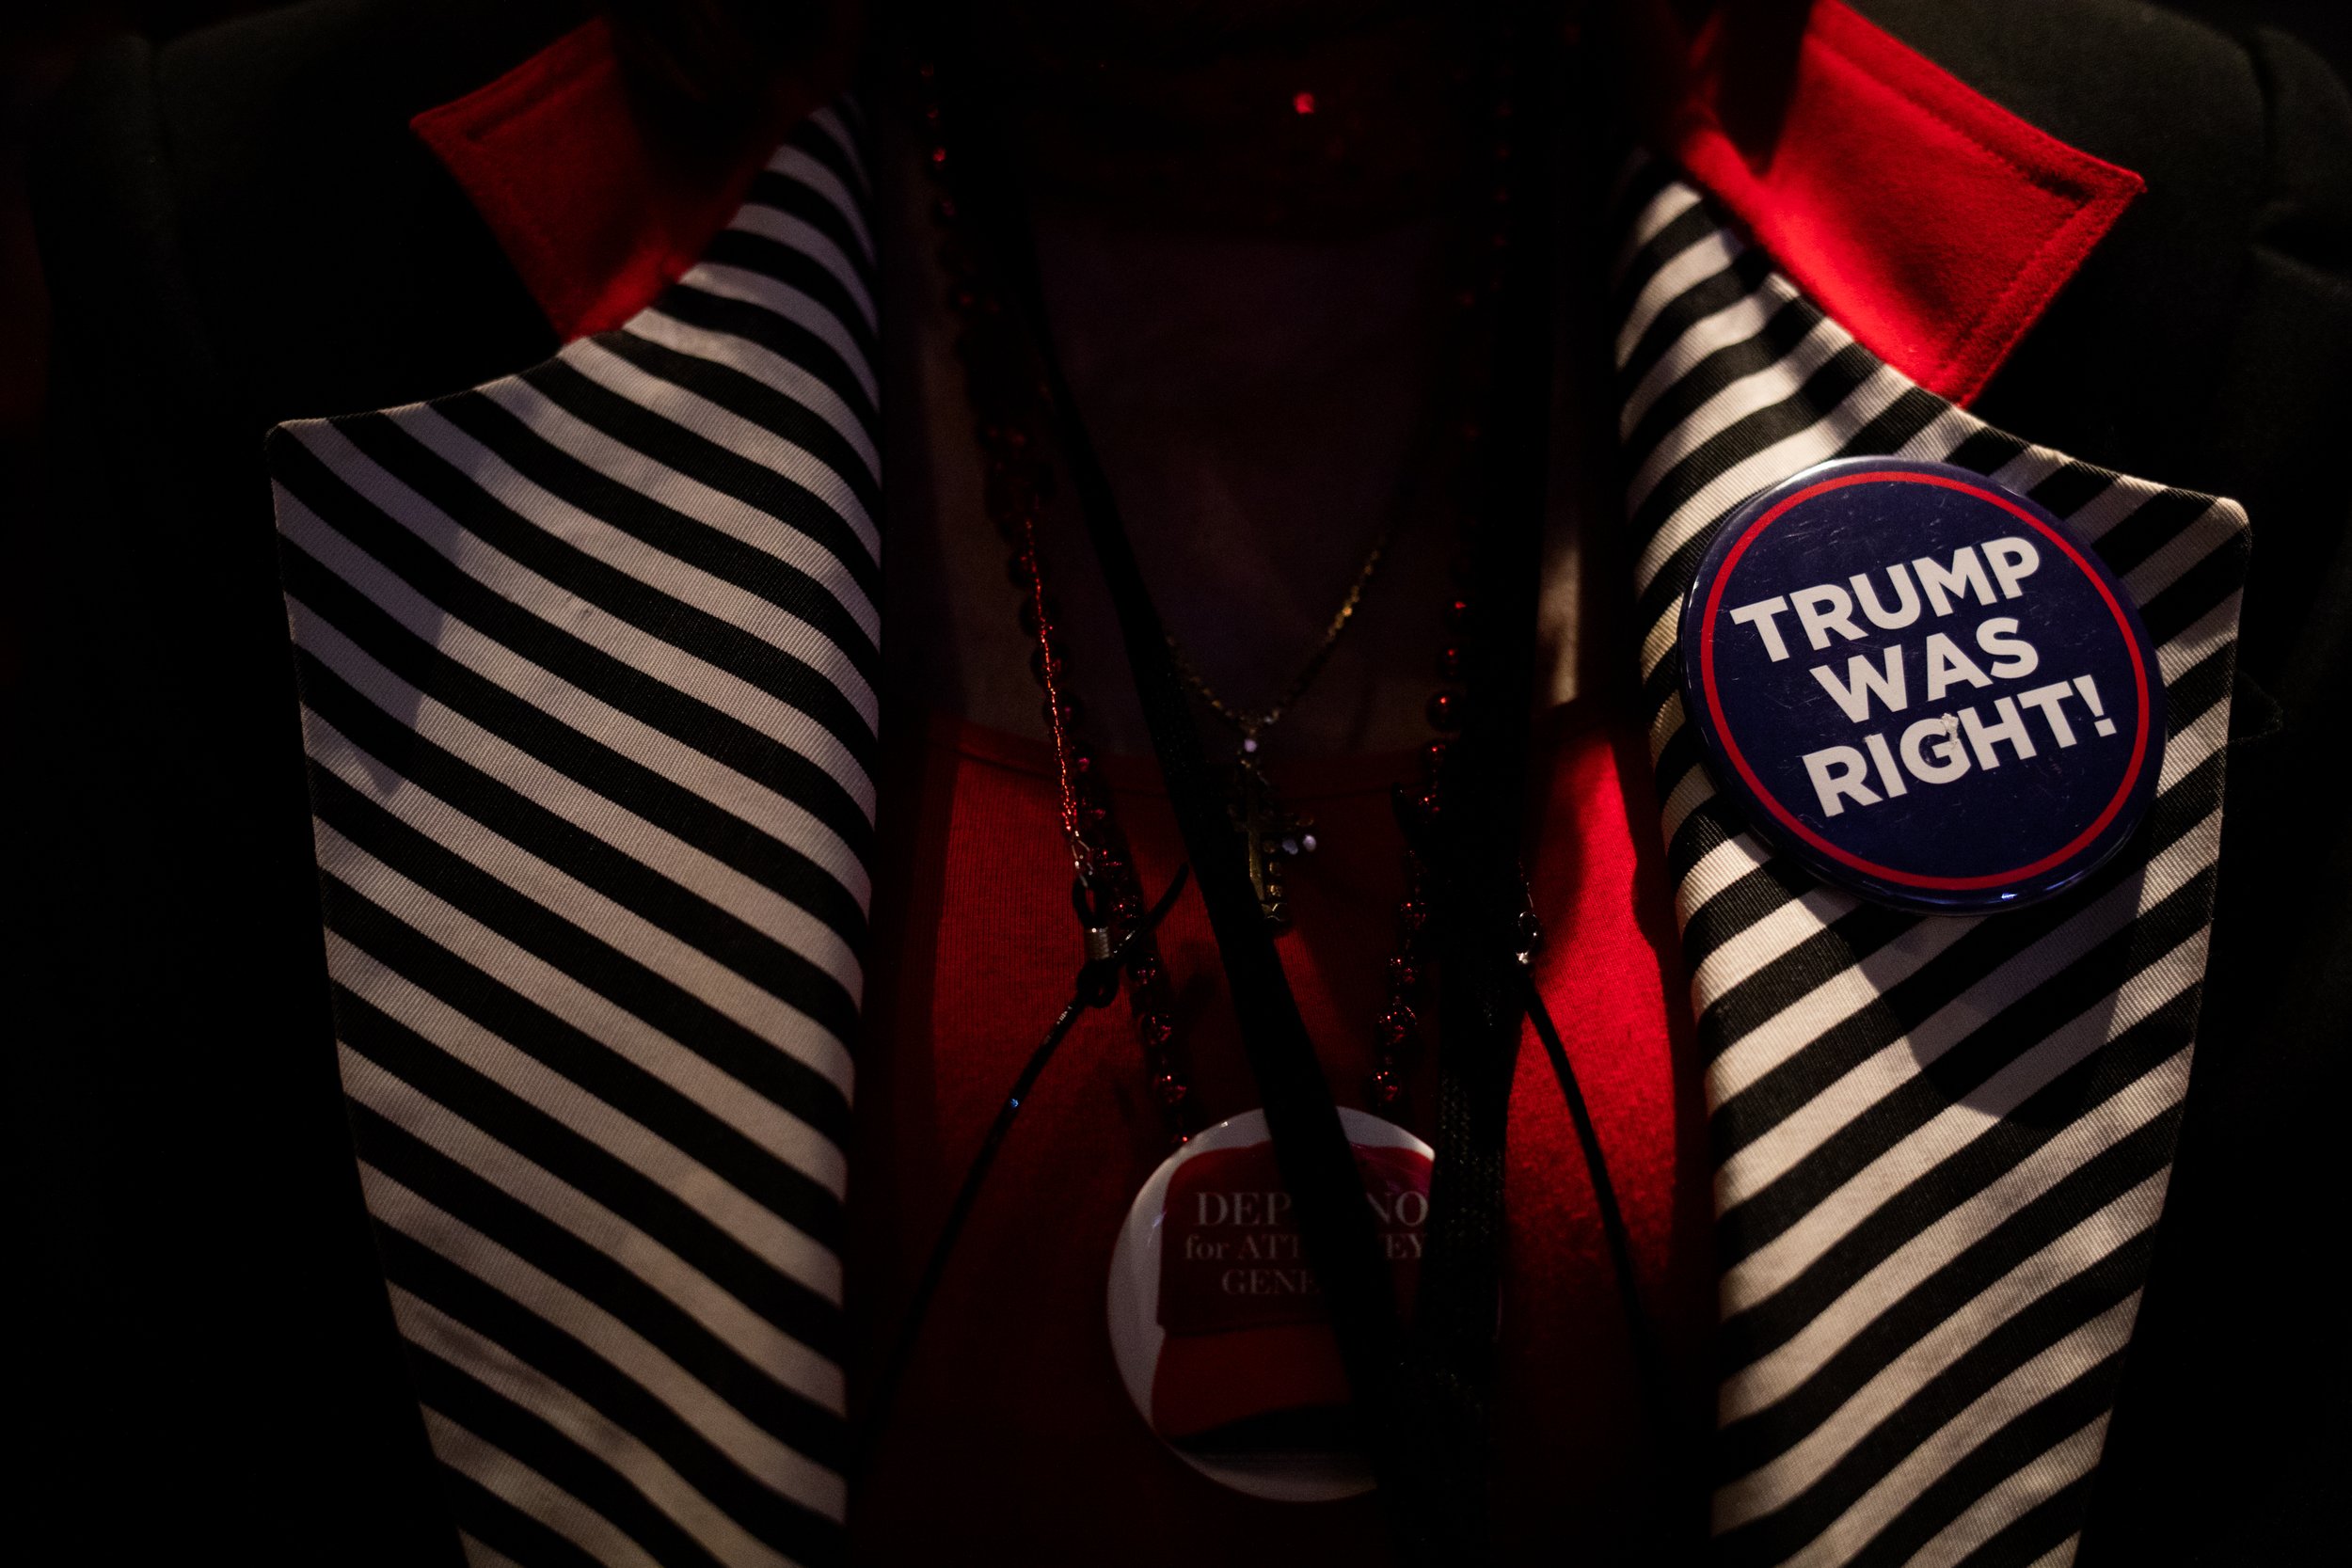  An attendee dons a ‘Trump was right’ pin during the Michigan GOP Convention at the Lansing Center in Lansing, Michigan, U.S. August 27, 2022. Emily Elconin for The New York Times  